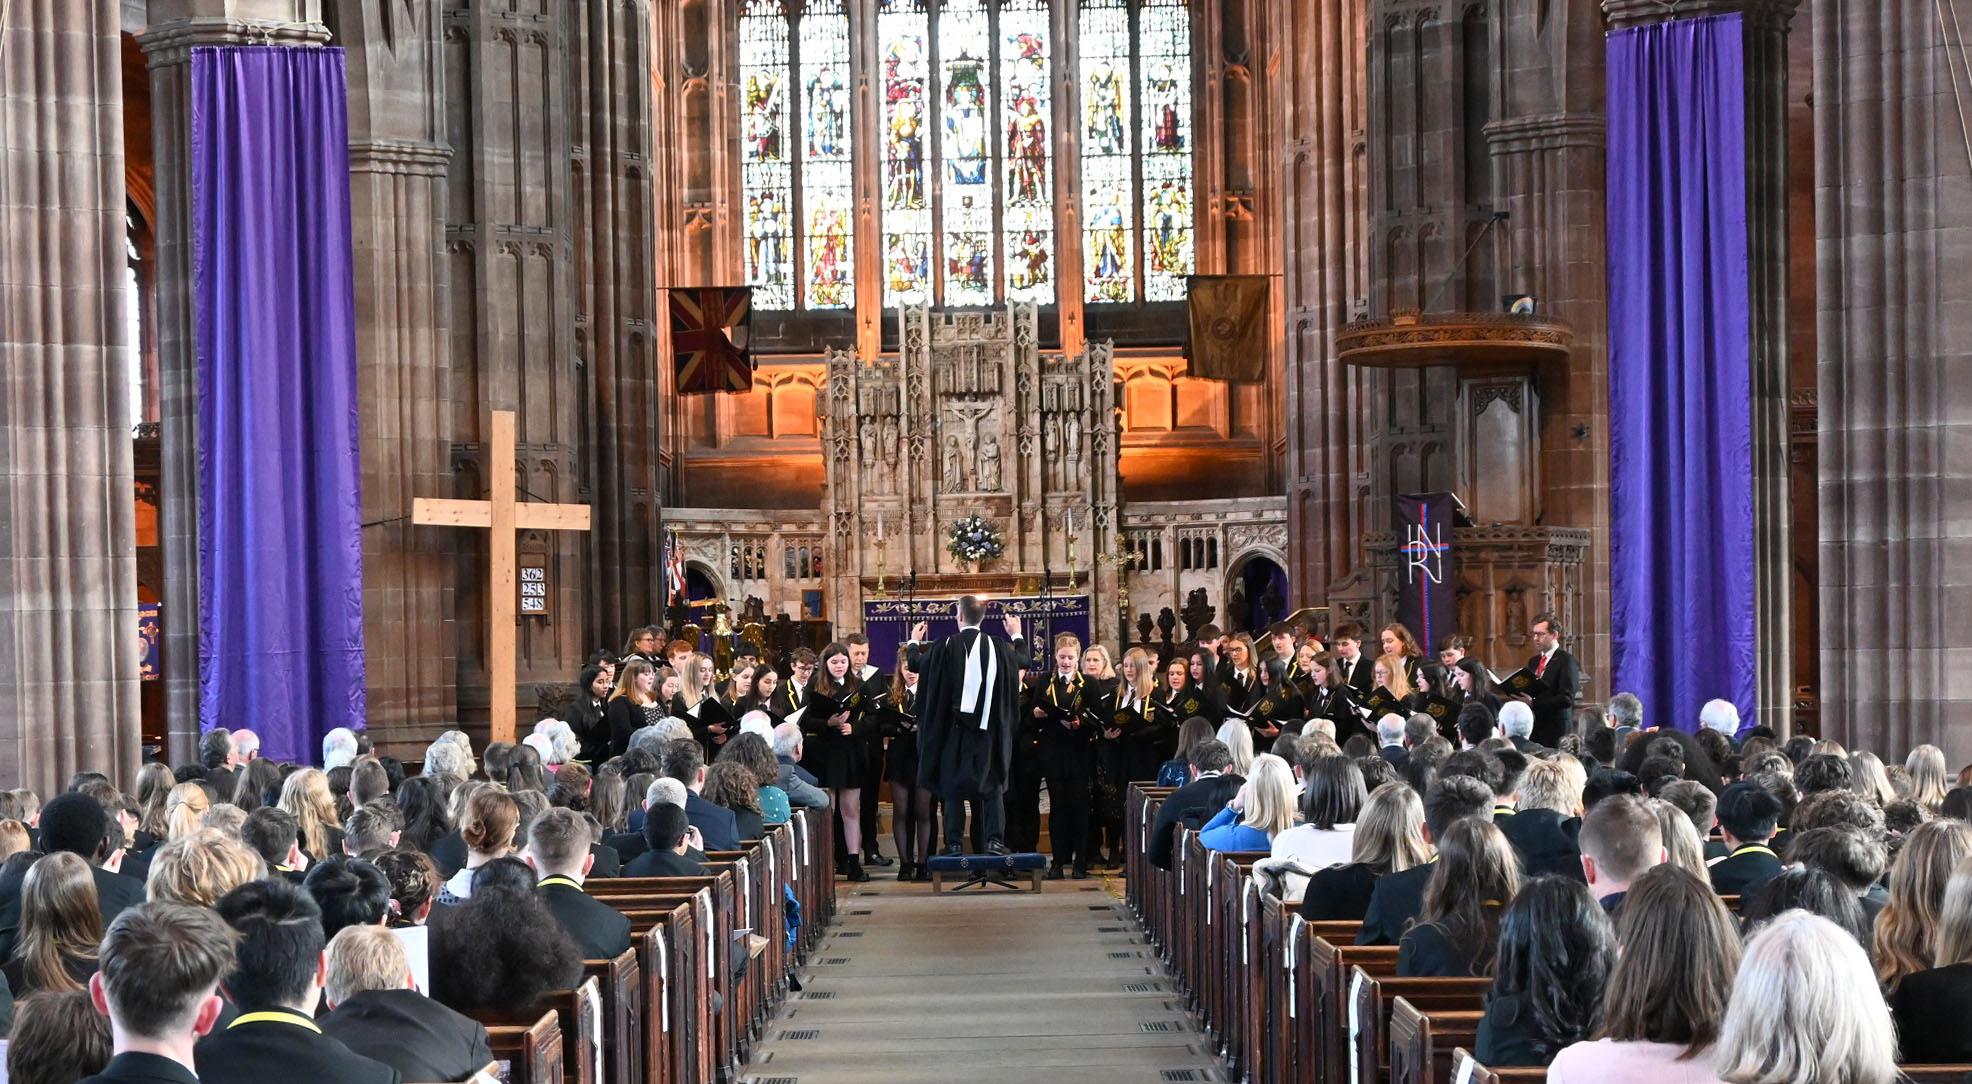 The impressive St George's Church hosted our Founder's Day 2023 service